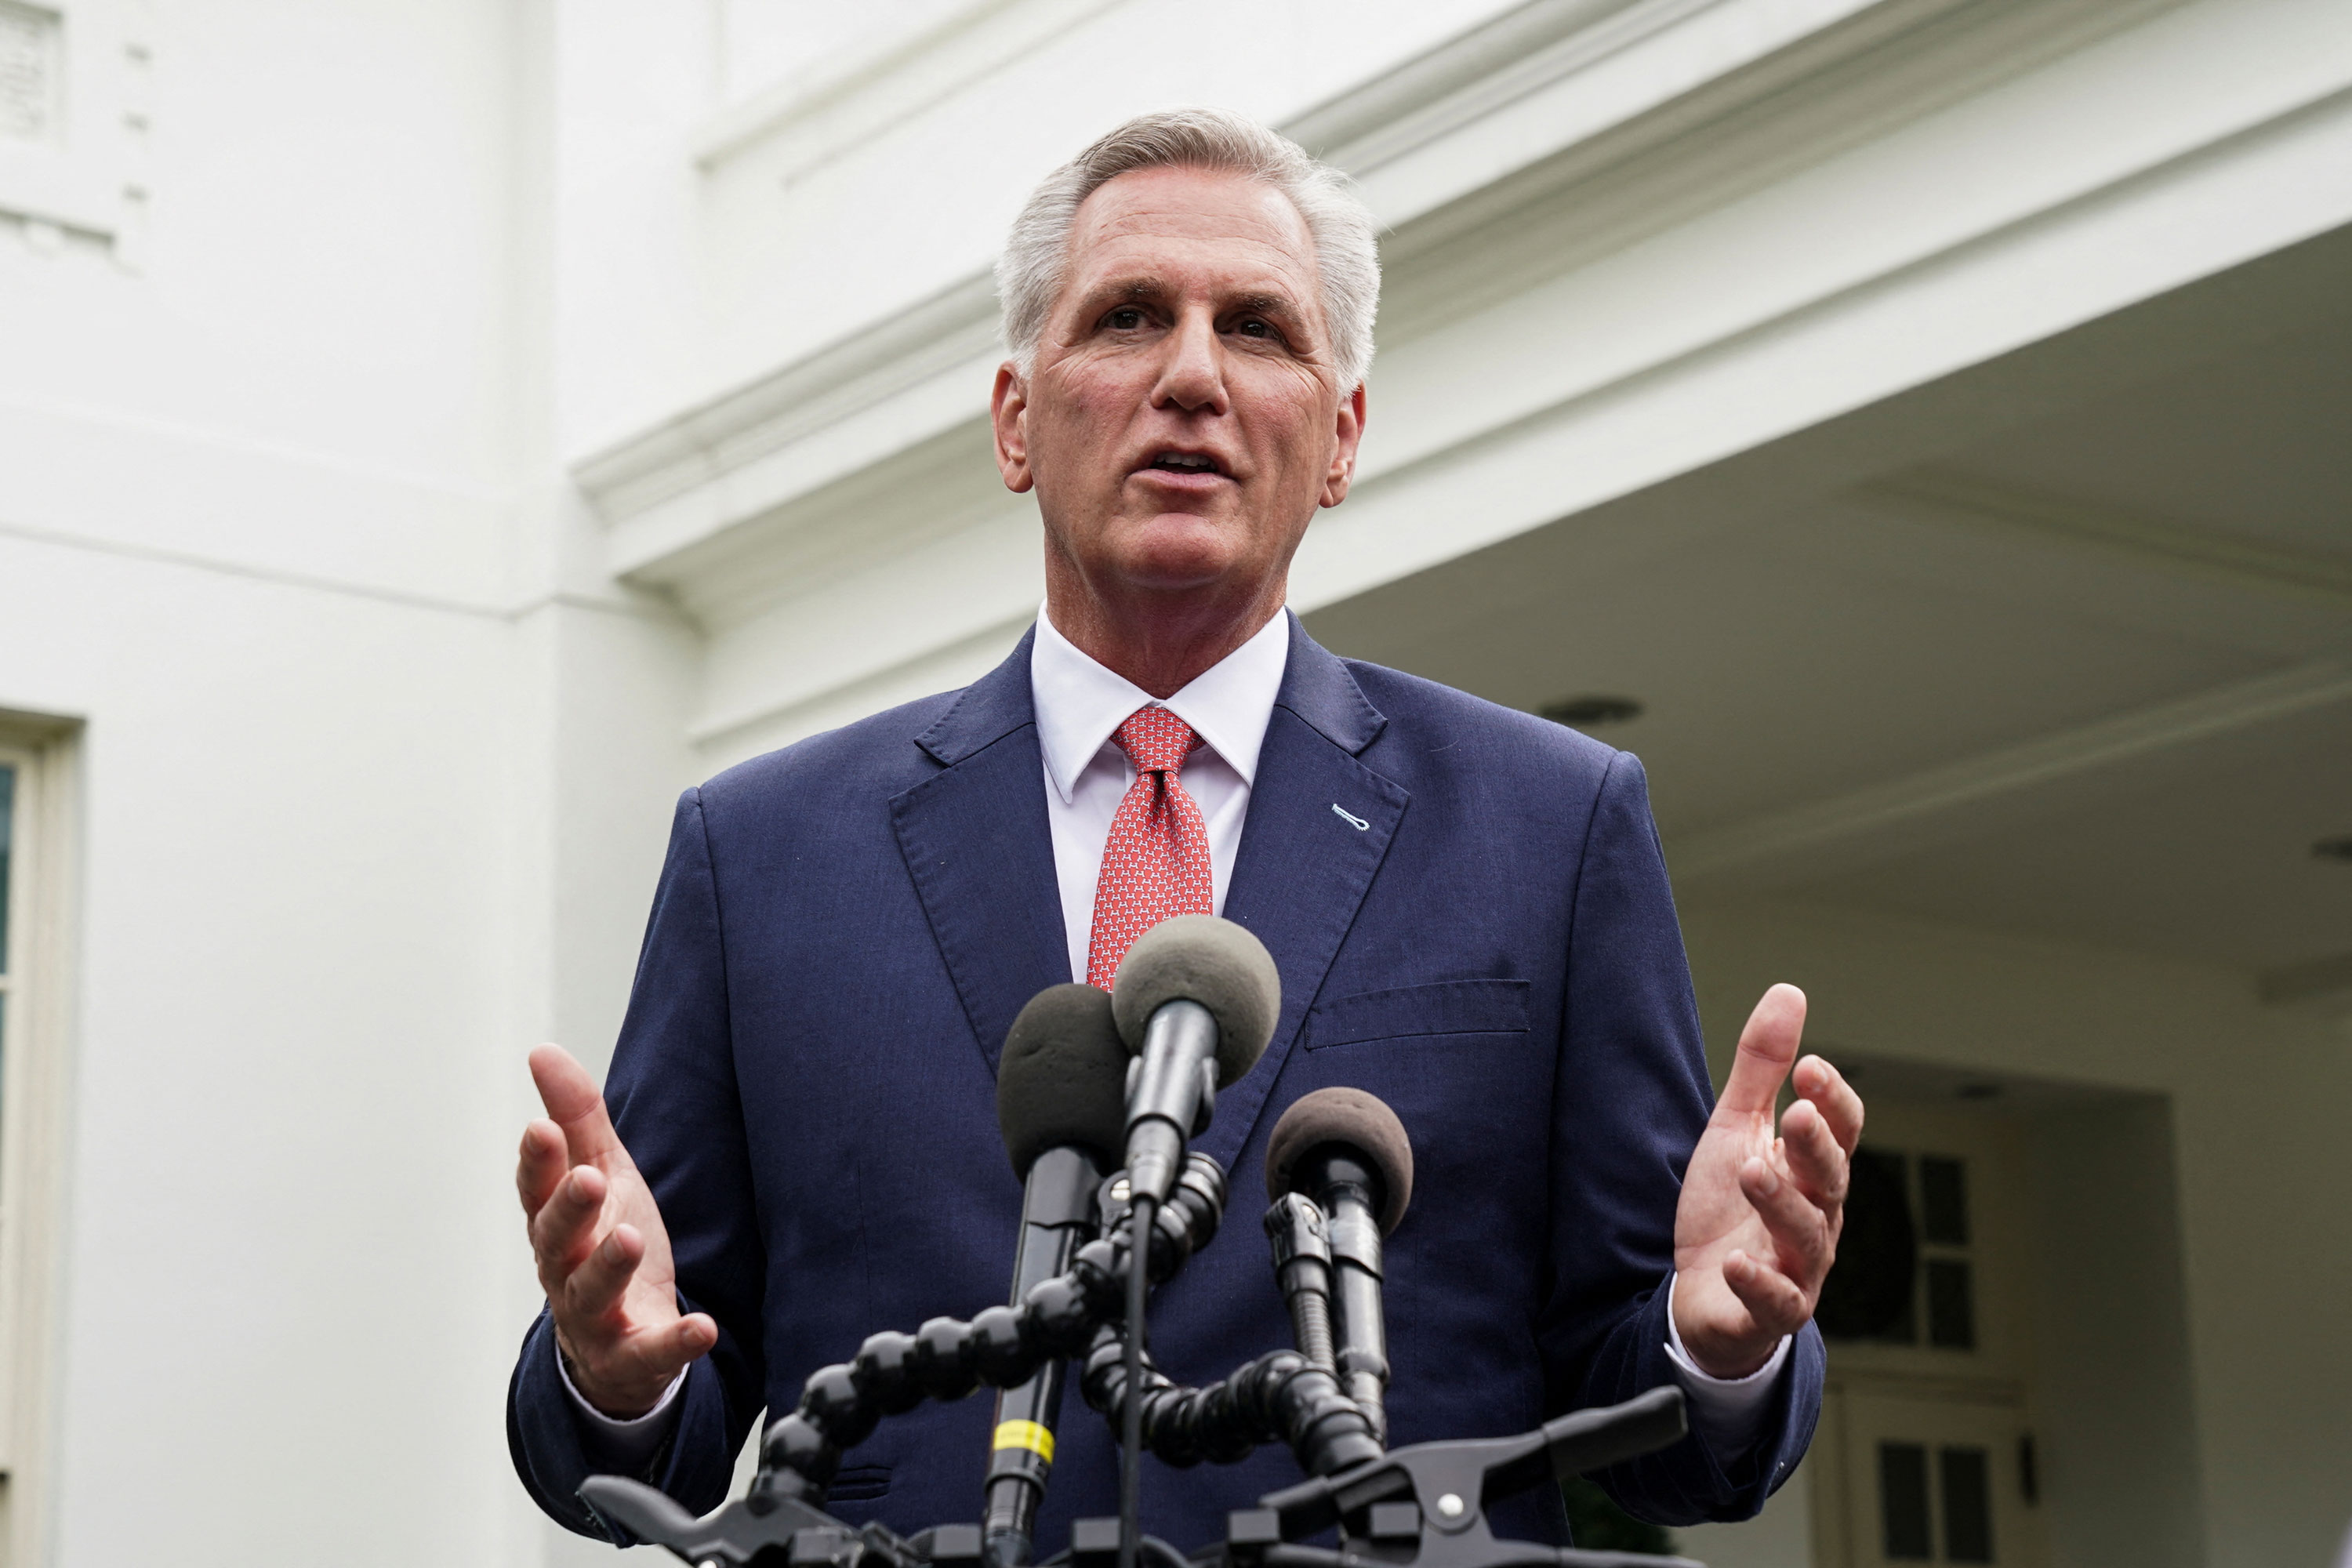 House Speaker Kevin McCarthy speaks to reporters outside the West Wing following debt limit talks with President Joe Biden and Congressional leaders at the White House in Washington, D.C., on May 16, 2023.